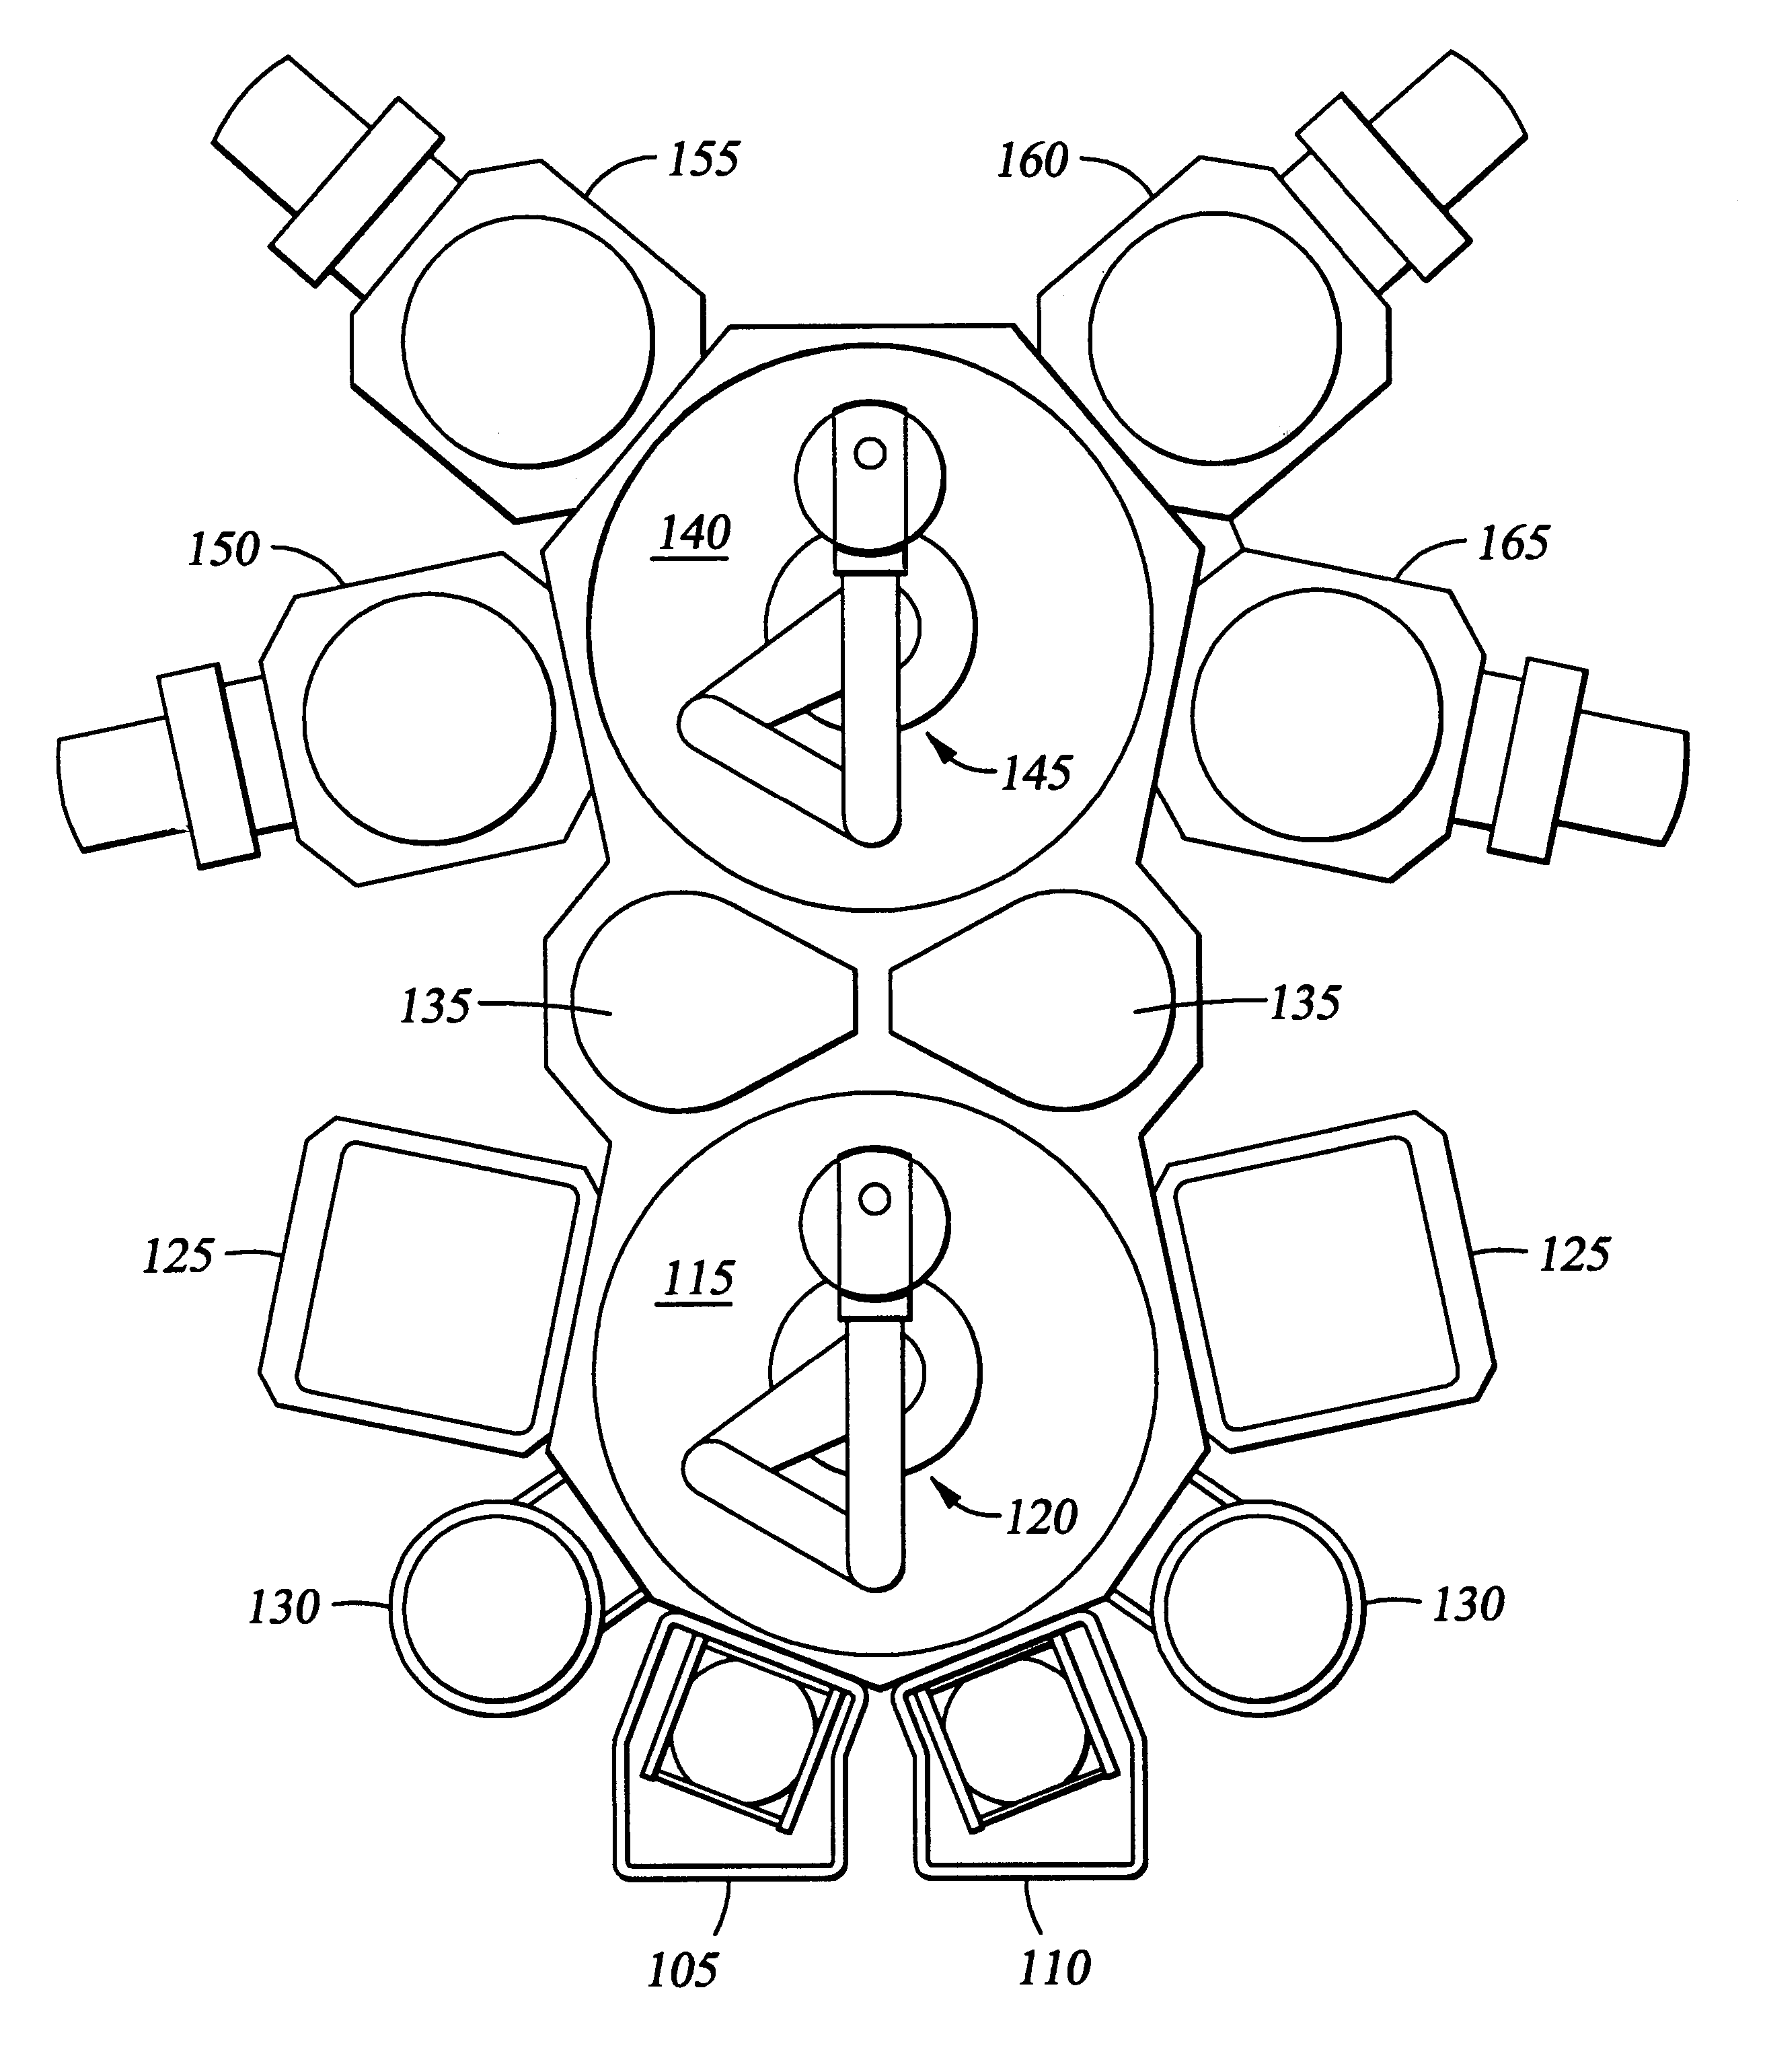 Method and apparatus for automatic calibration of robots